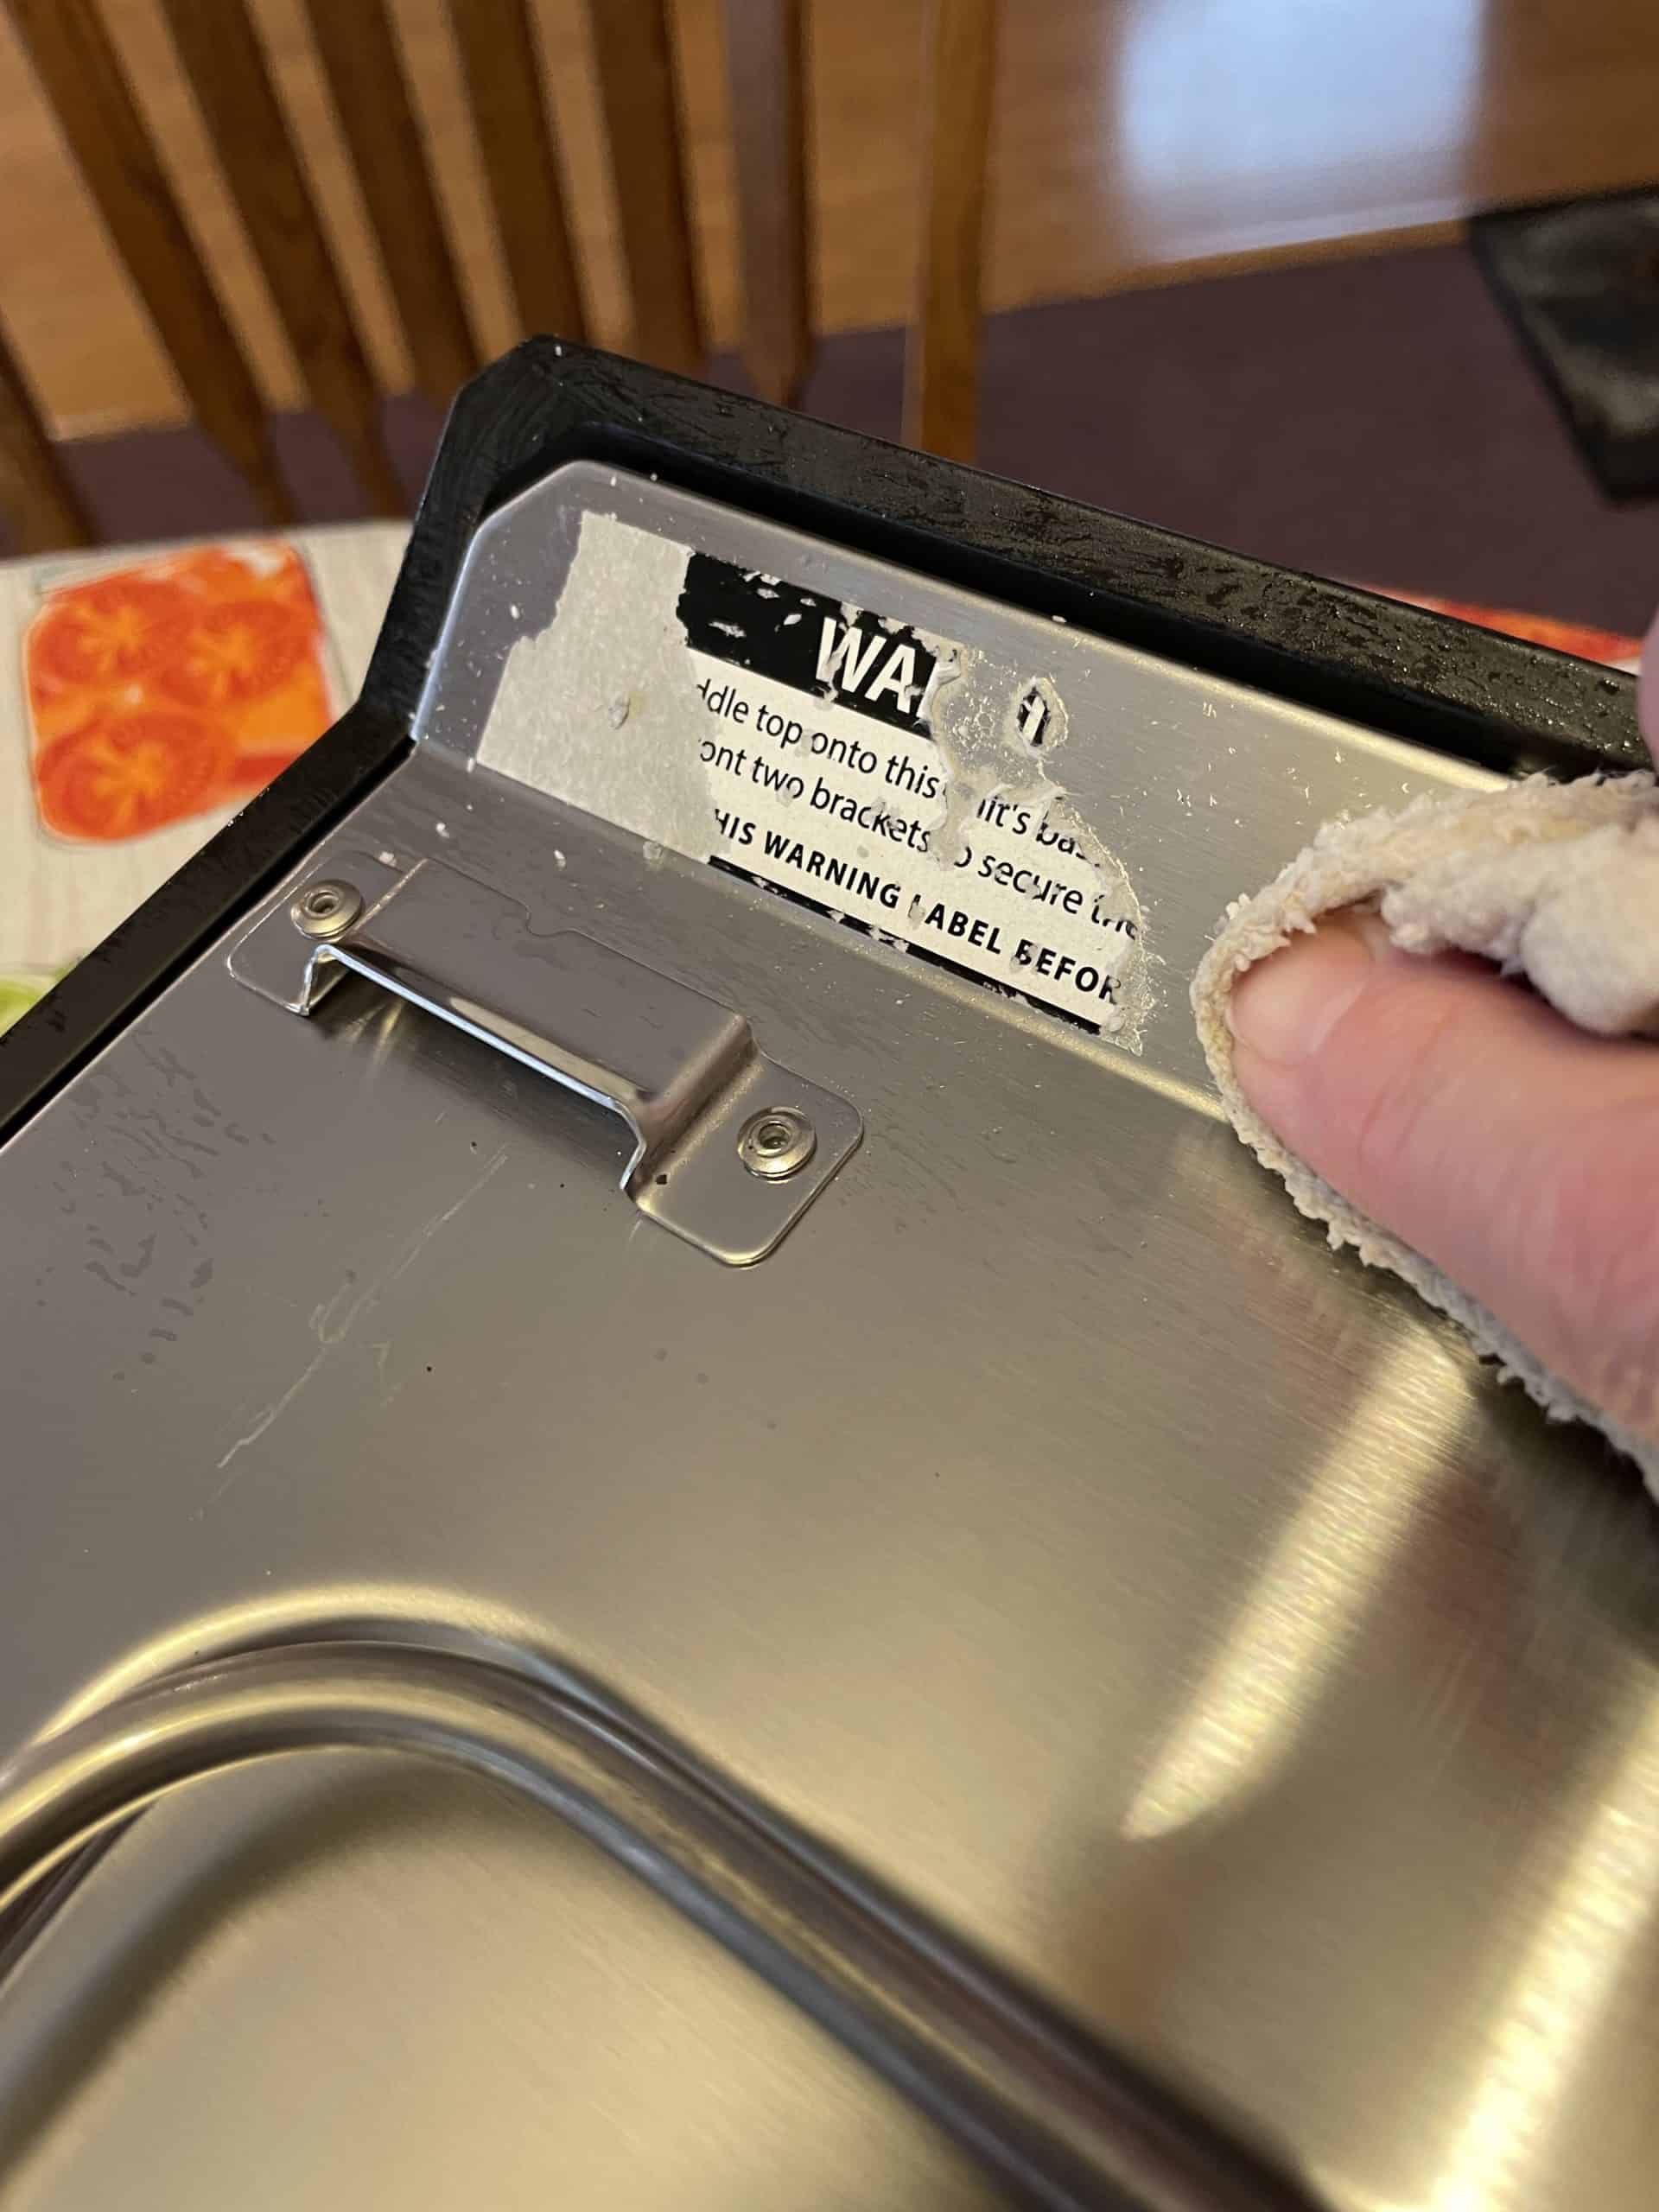 Remove the warning sticker before placing the flat top griddle onto the base.